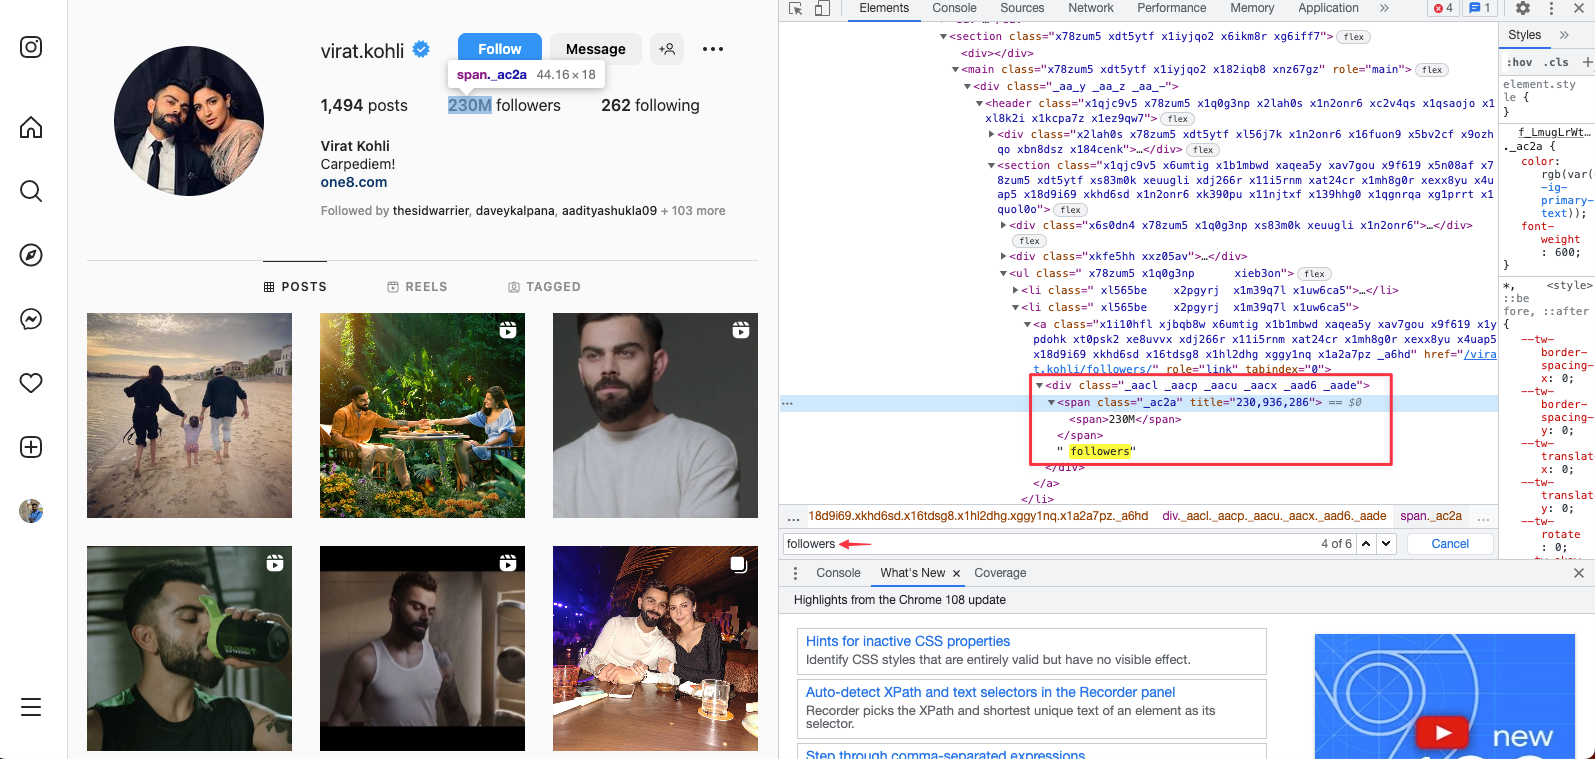 Remote.tools showing developer tools on Instagram website and searching for word followers in the source code to find other people's followers